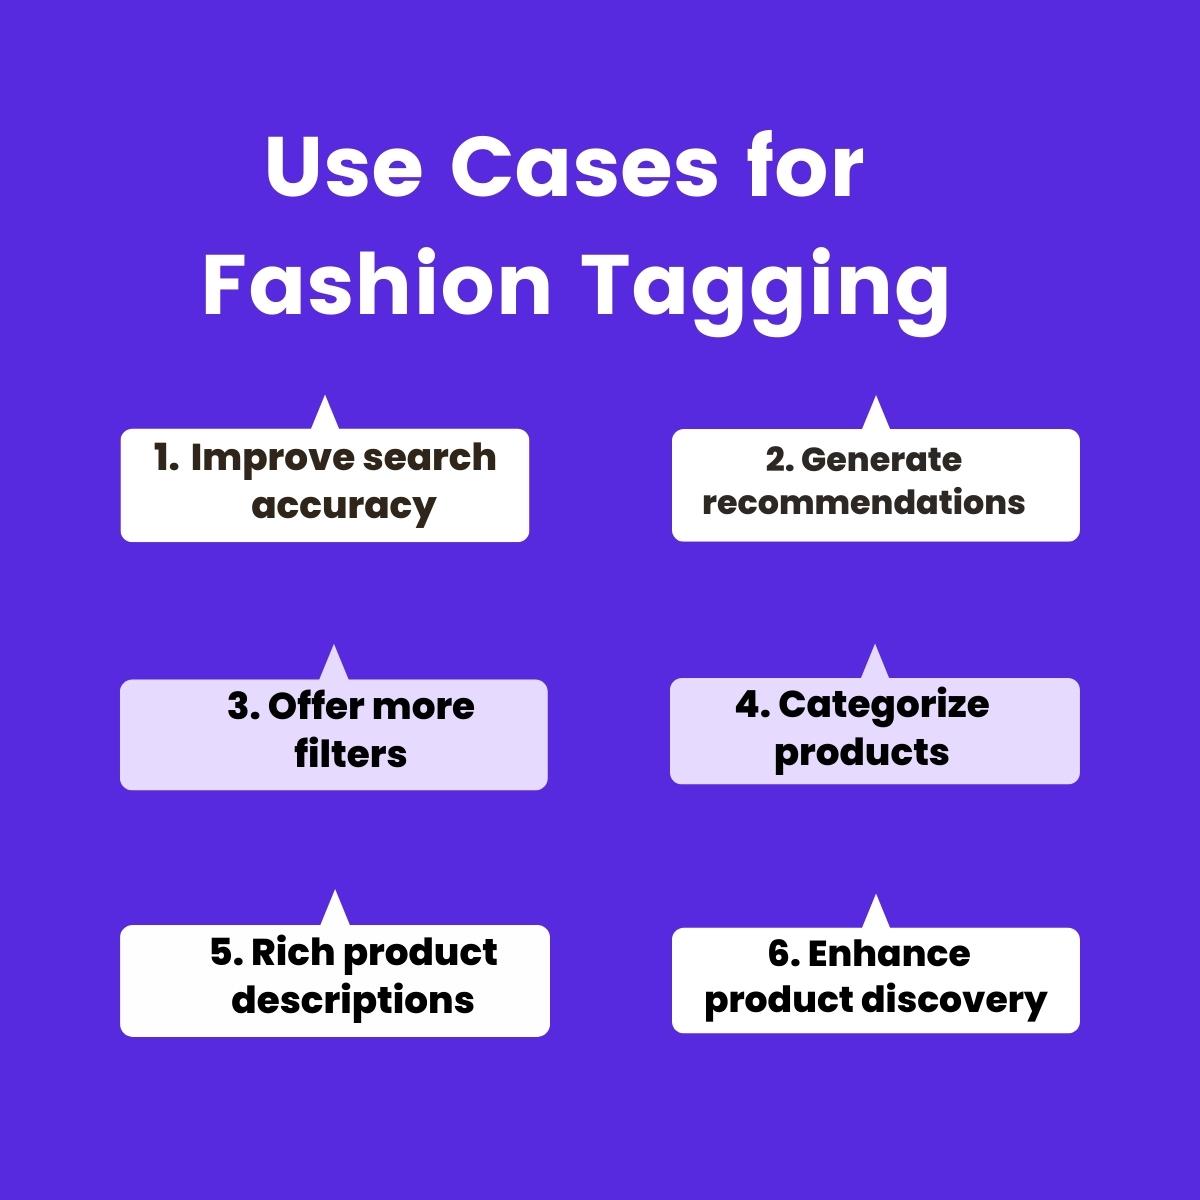 A list of the use cases for fashion tagging